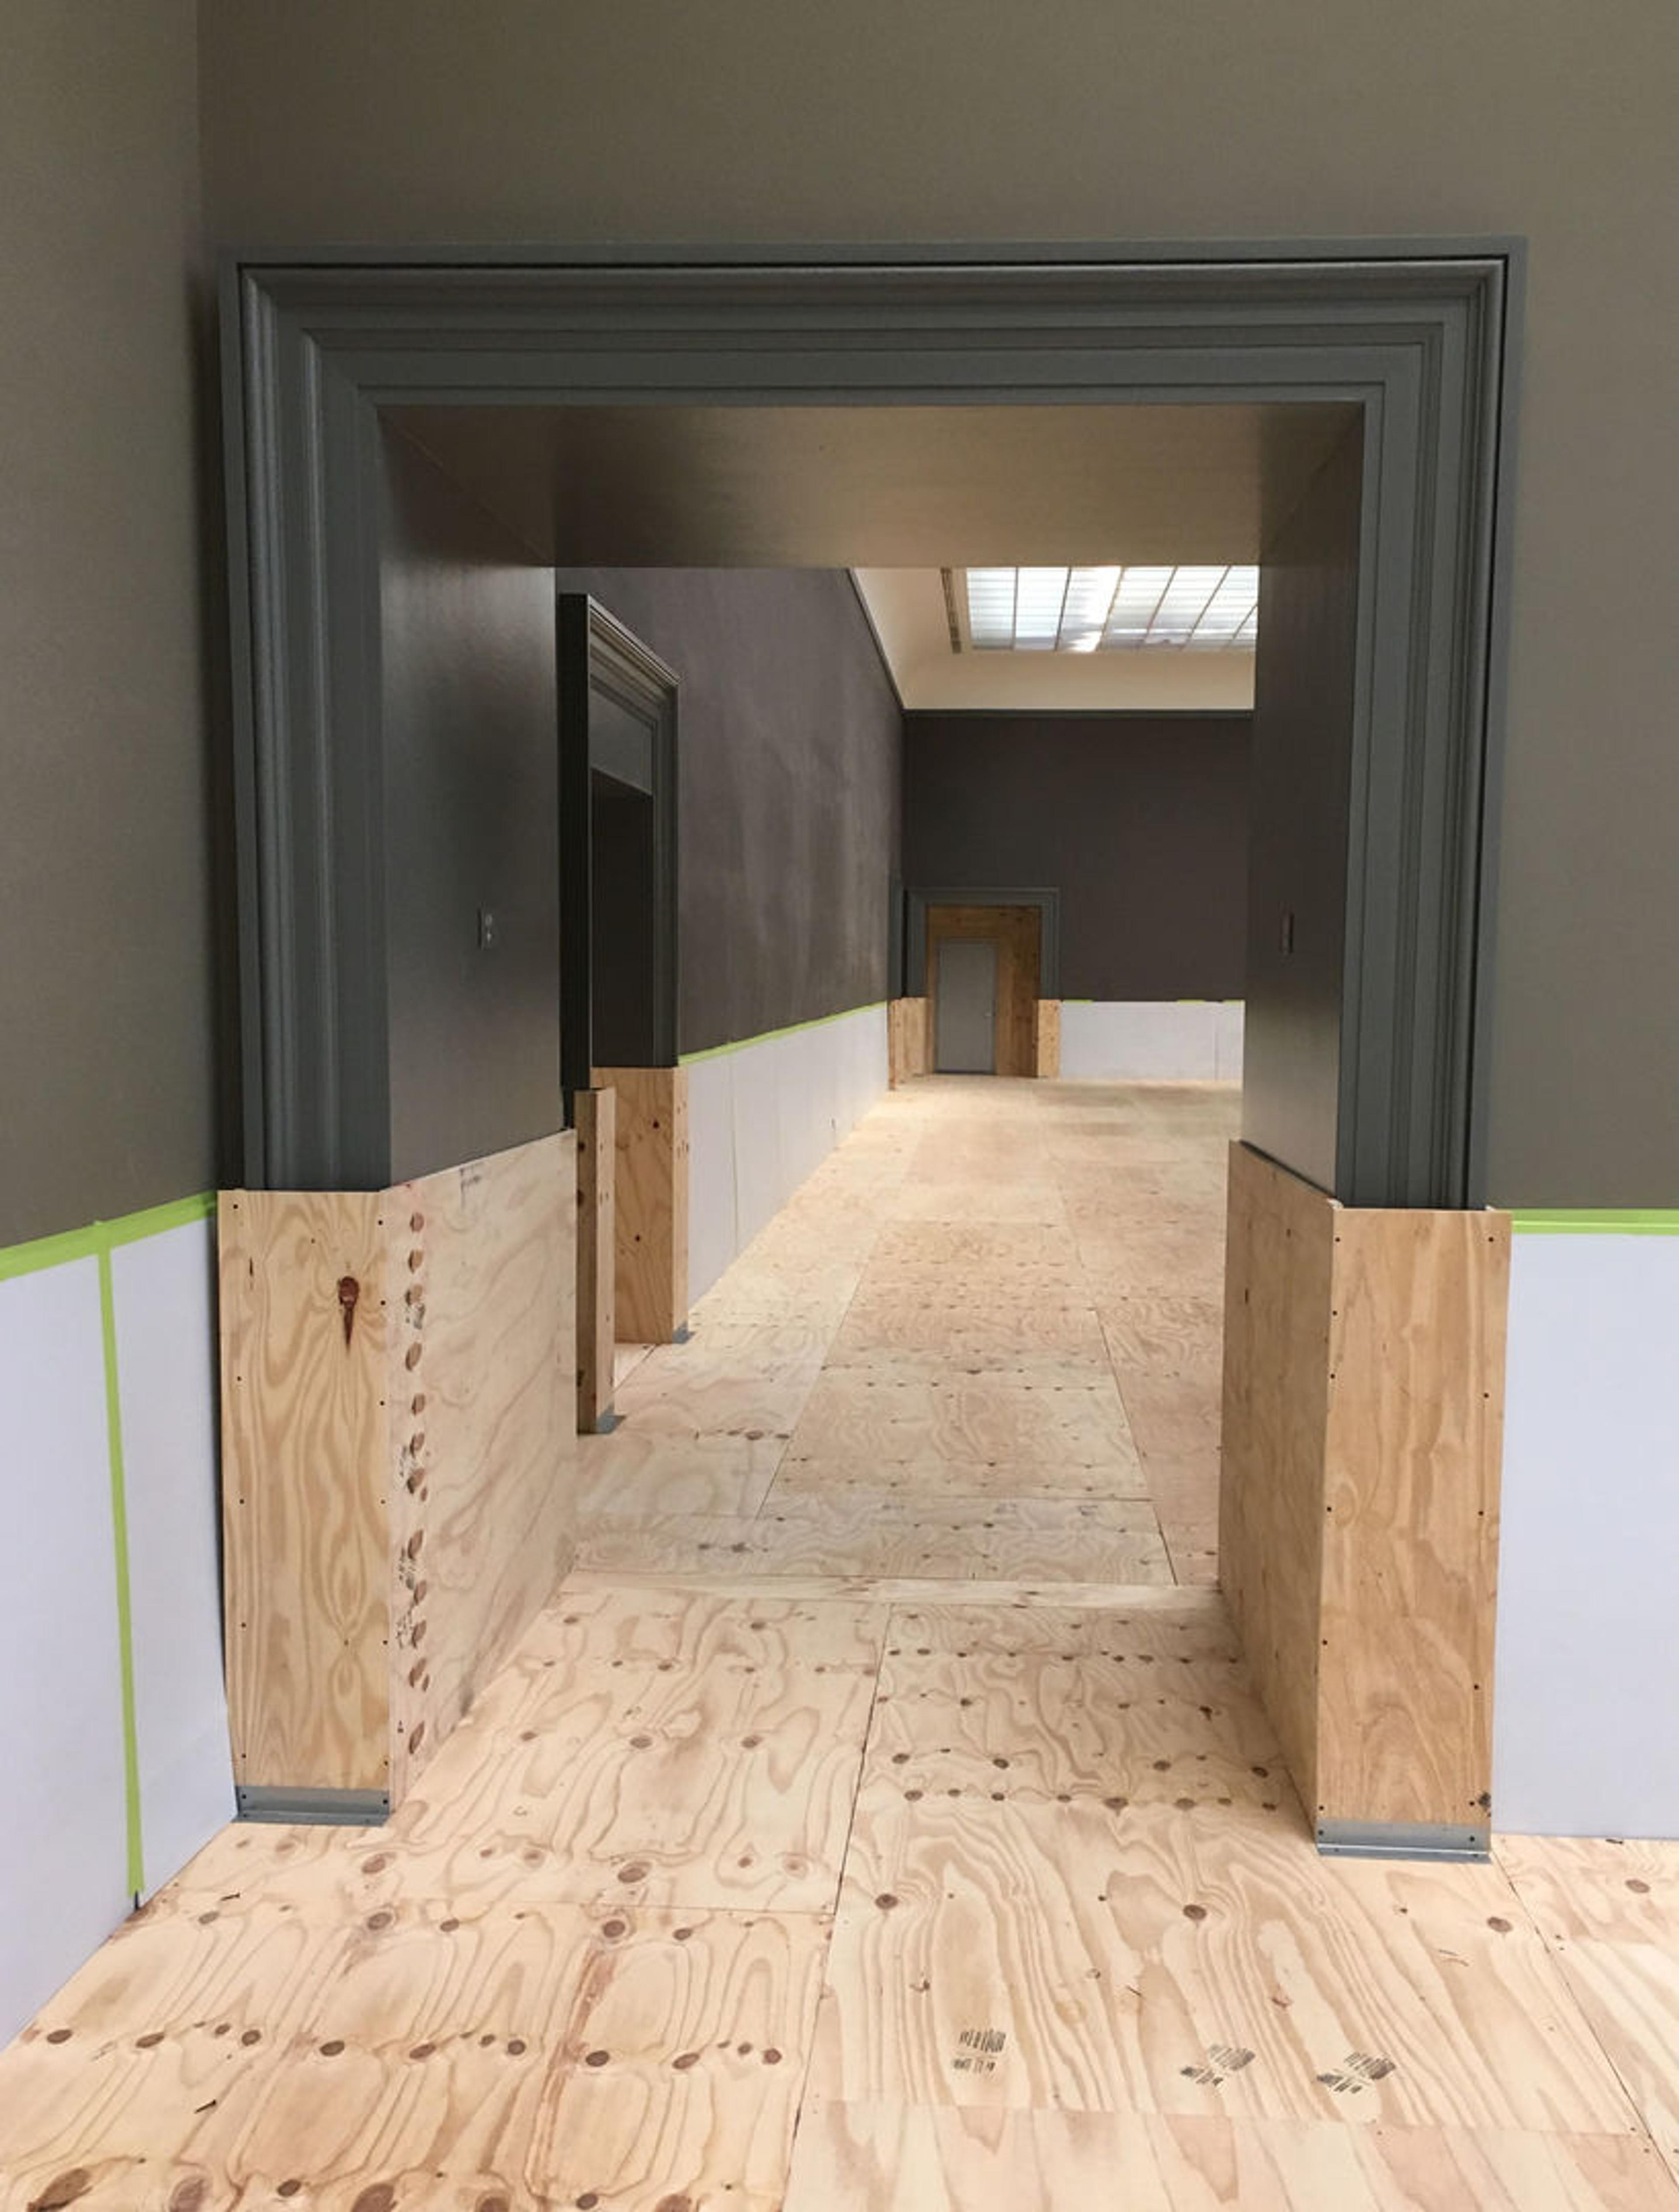 A doorway to an empty gallery undergoing construction at The Met